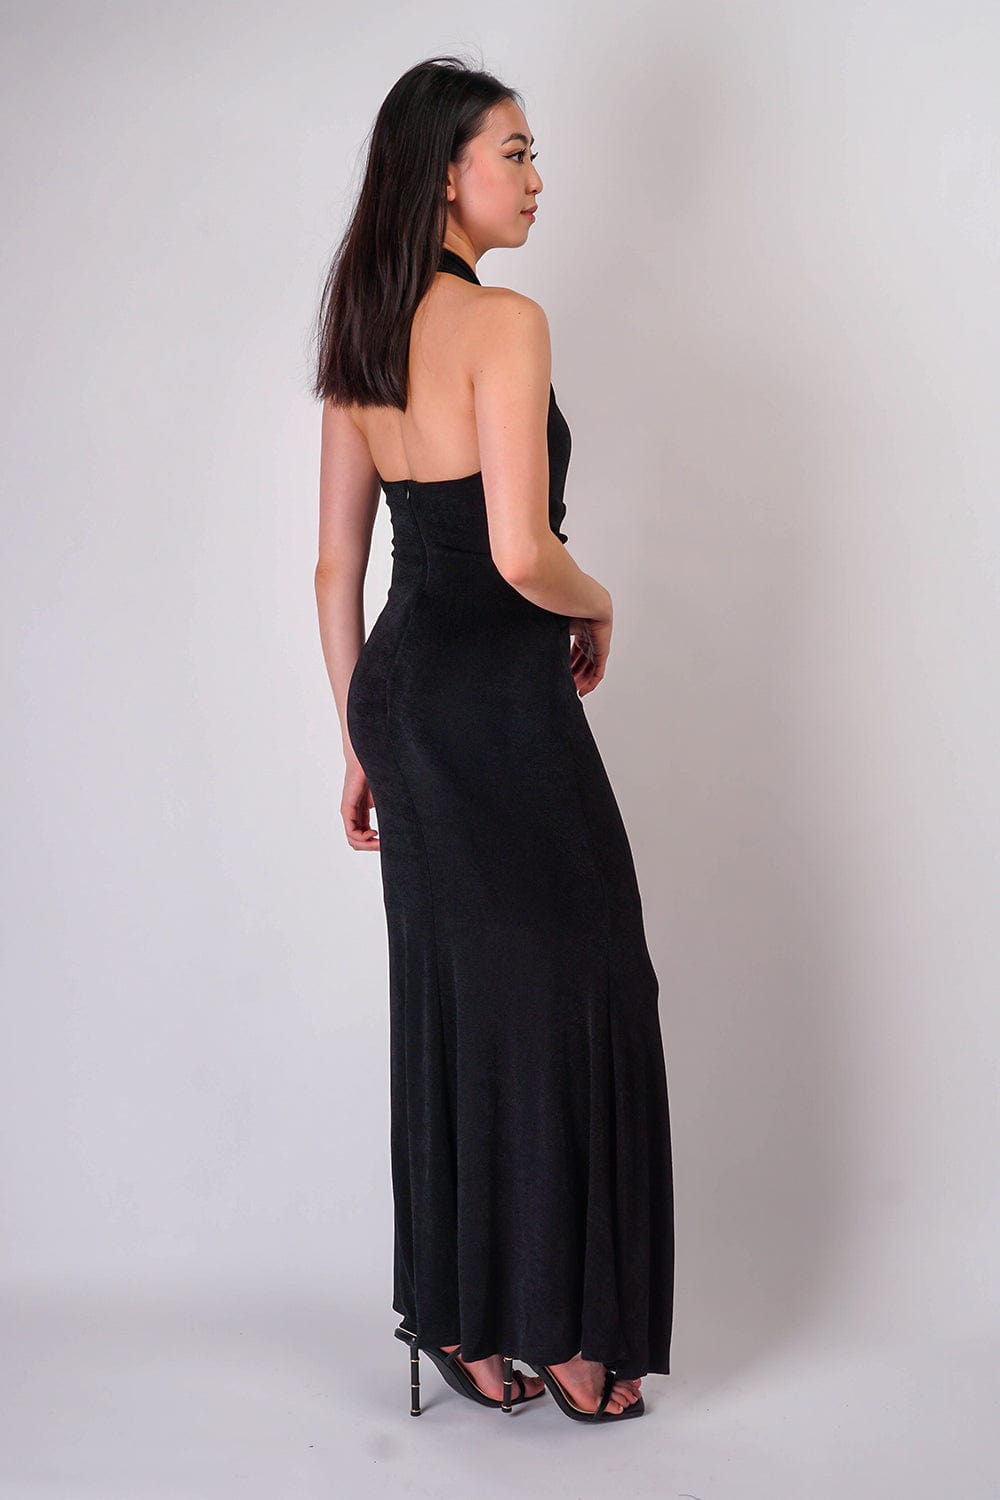 DCD Gowns Black Halter Open Front Jersey Gown